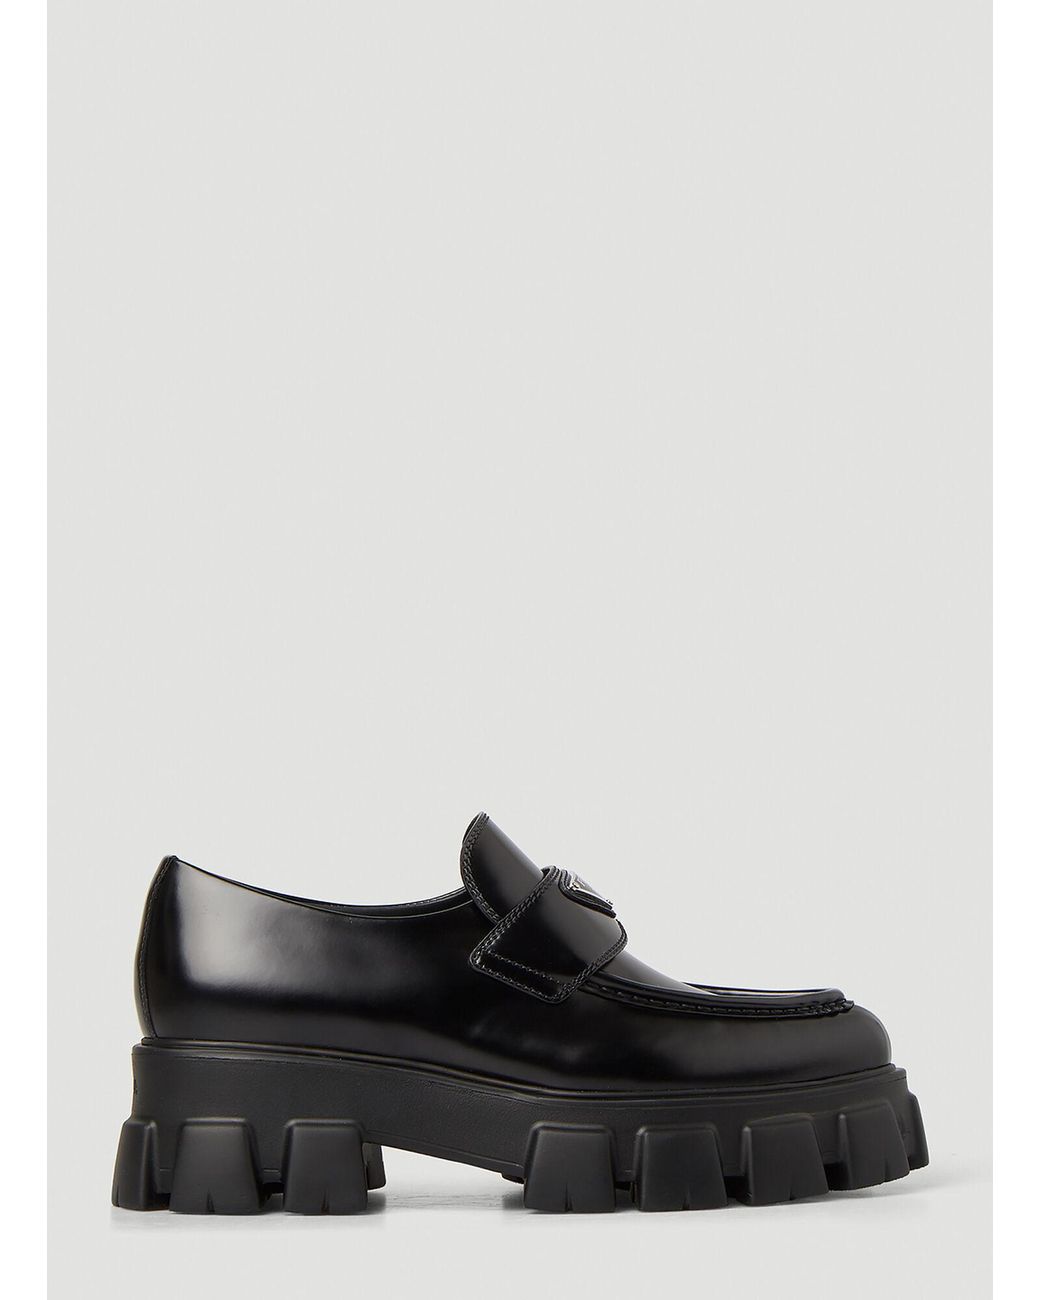 Prada Pointed Toe Monolith Loafers in Black | Lyst